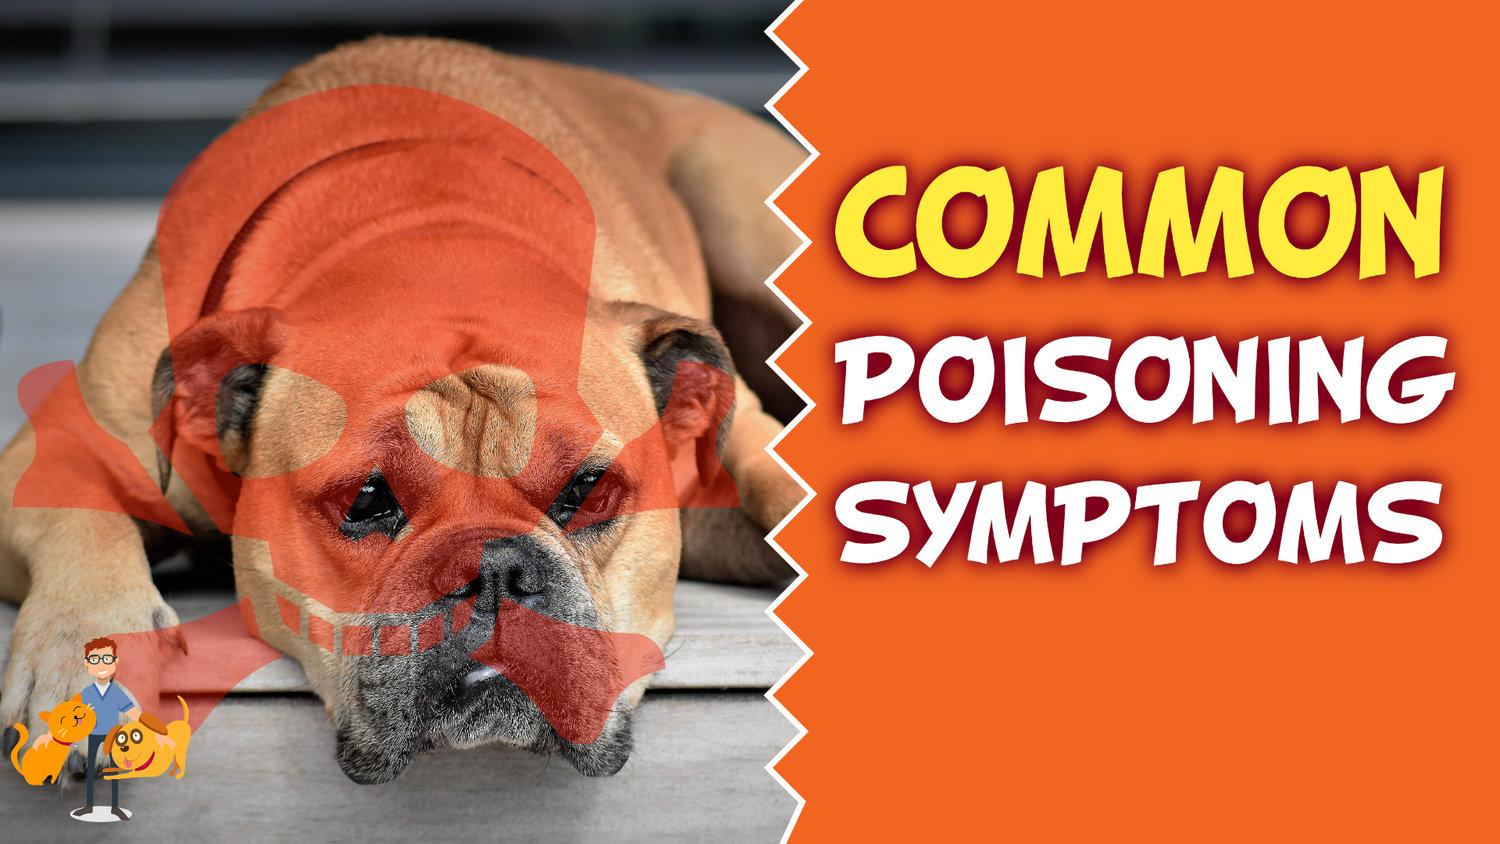 Has Your Dog Been Poisoned? The Deadly Signs of Poisoning — Our Pet's